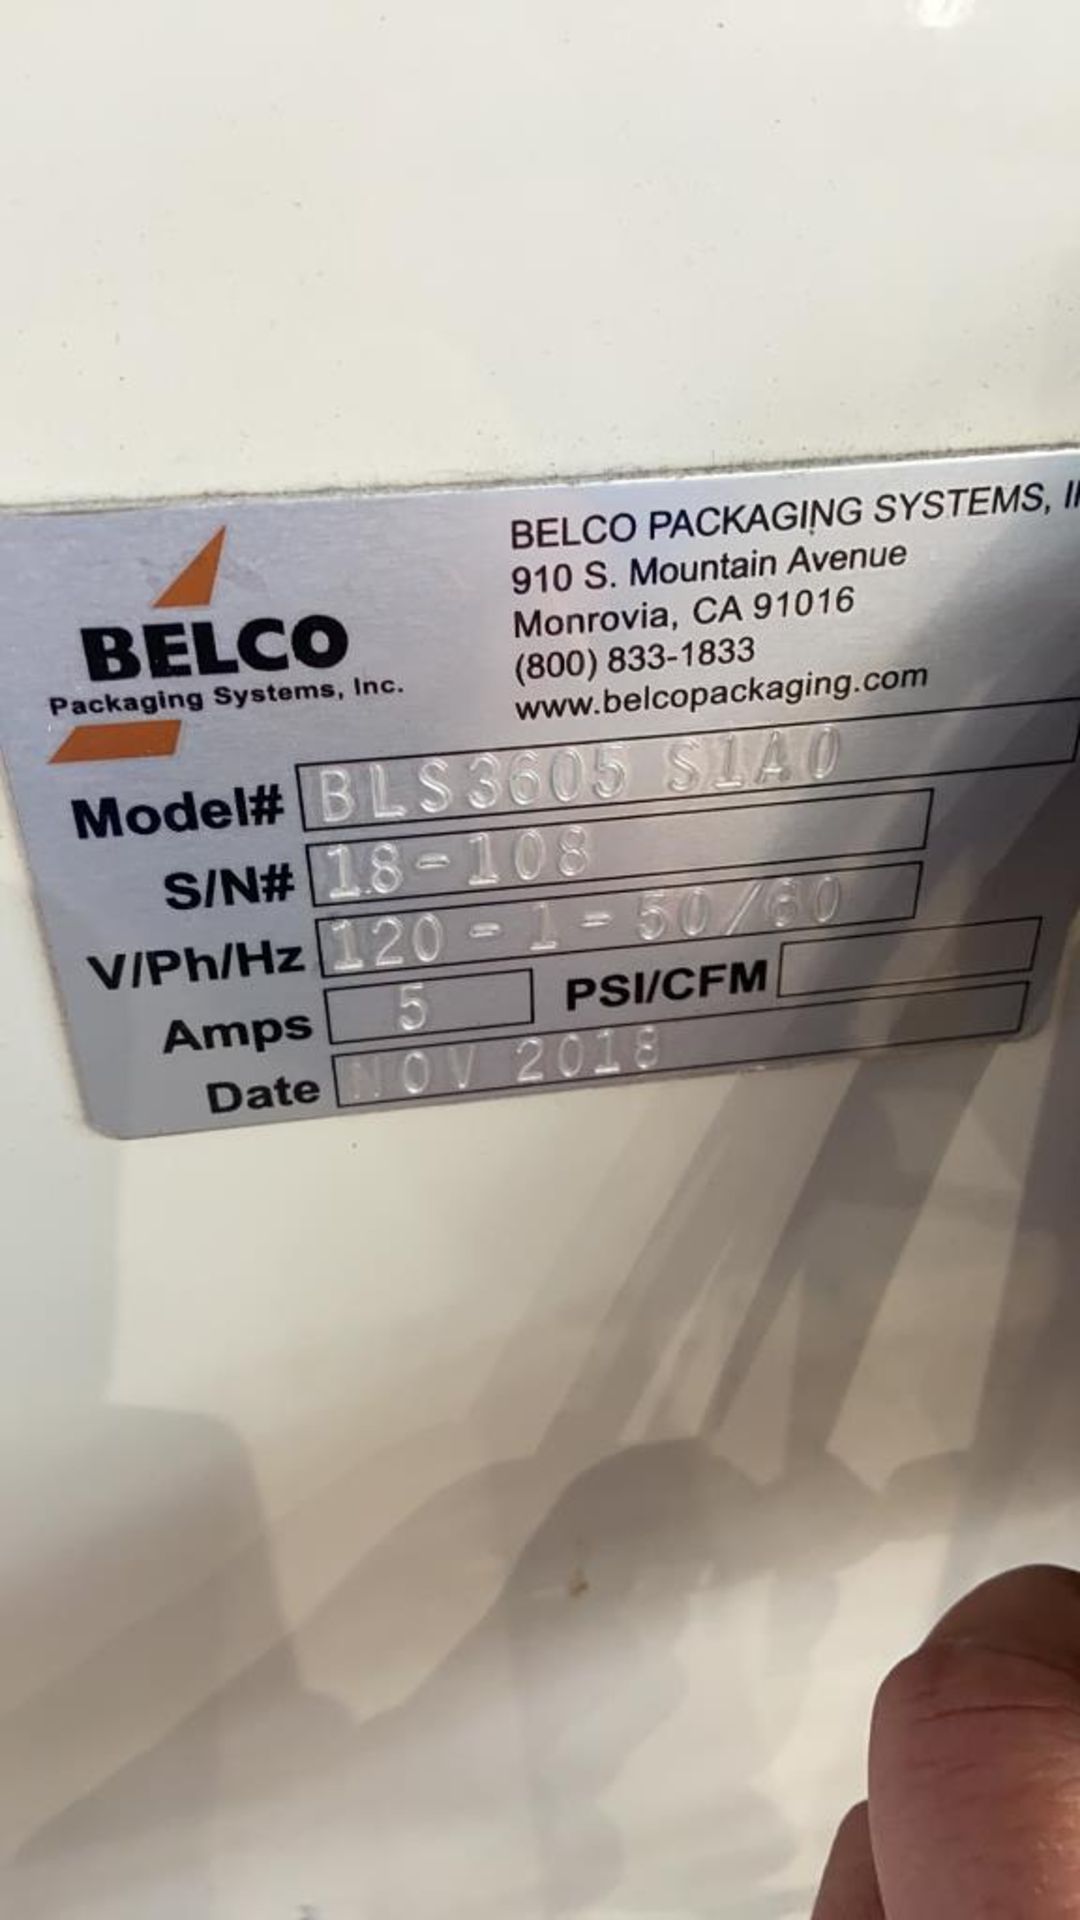 2018 Belco Packaging Systems Inc. 36" Dia. Accumulation Table, M/N BLS3605 S1A0, S/N 18-108, 120 - Image 6 of 8